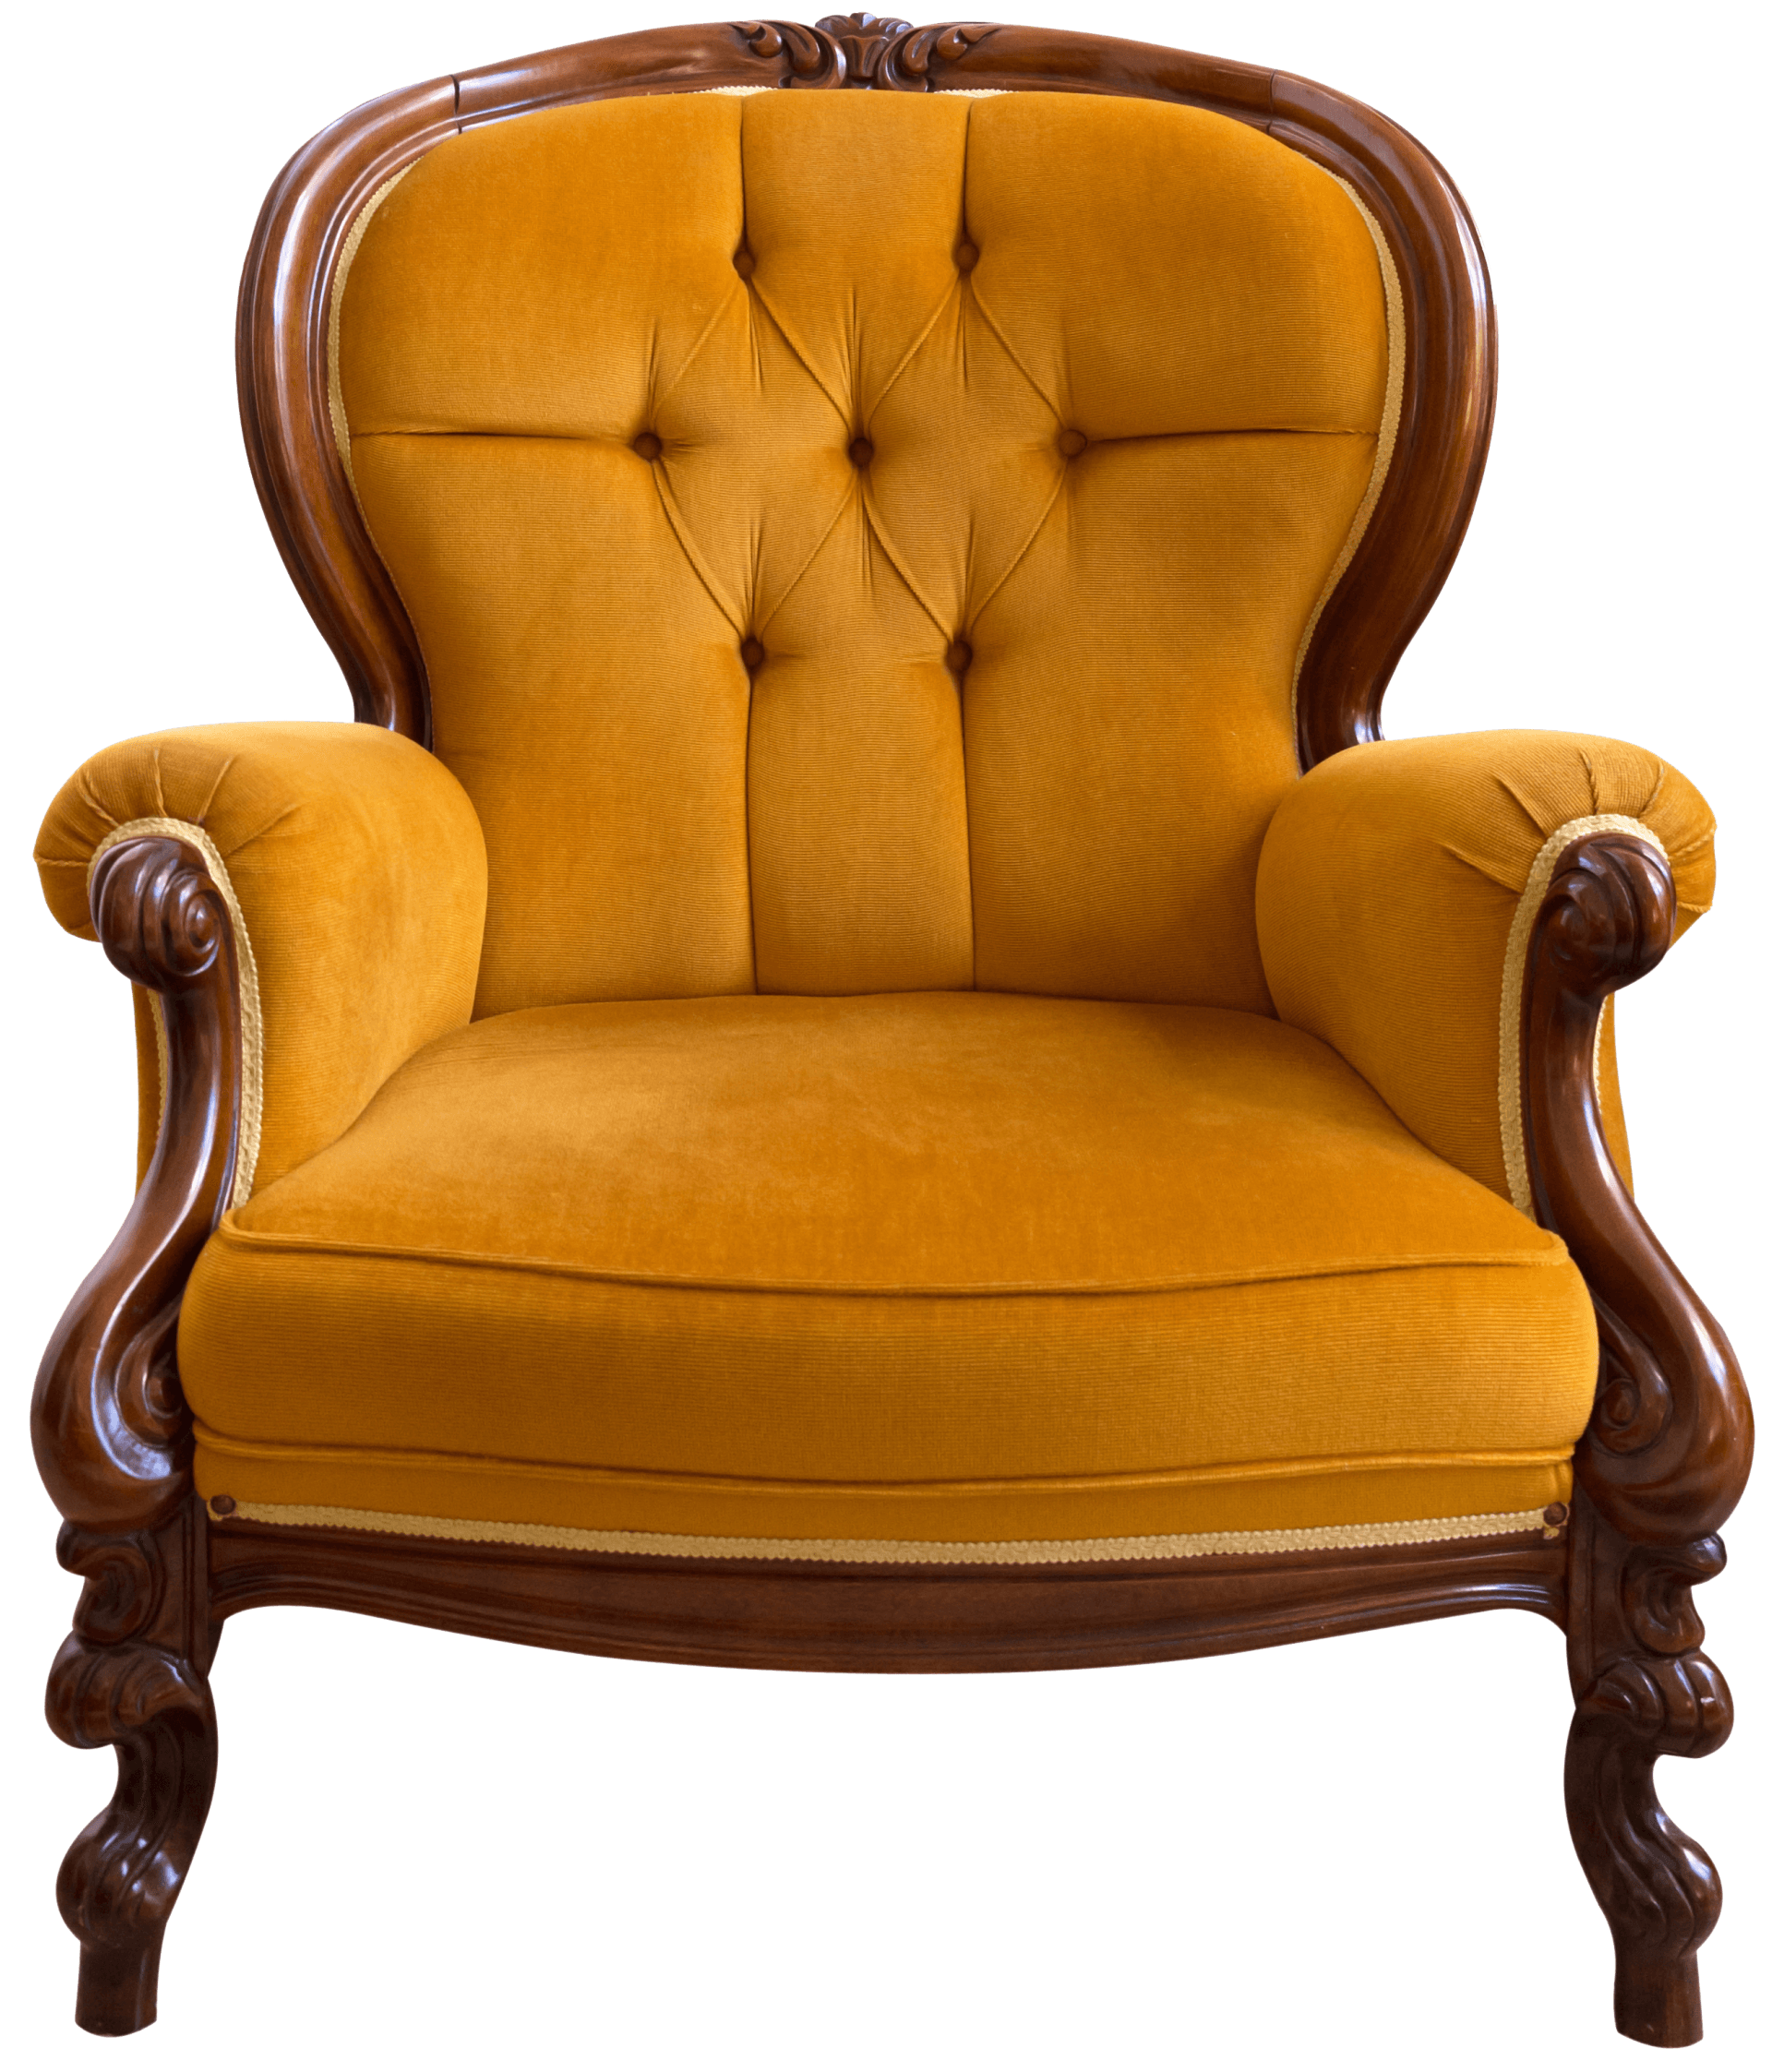 Yellow vintage chair — College Station, TX — Quality Used Furniture